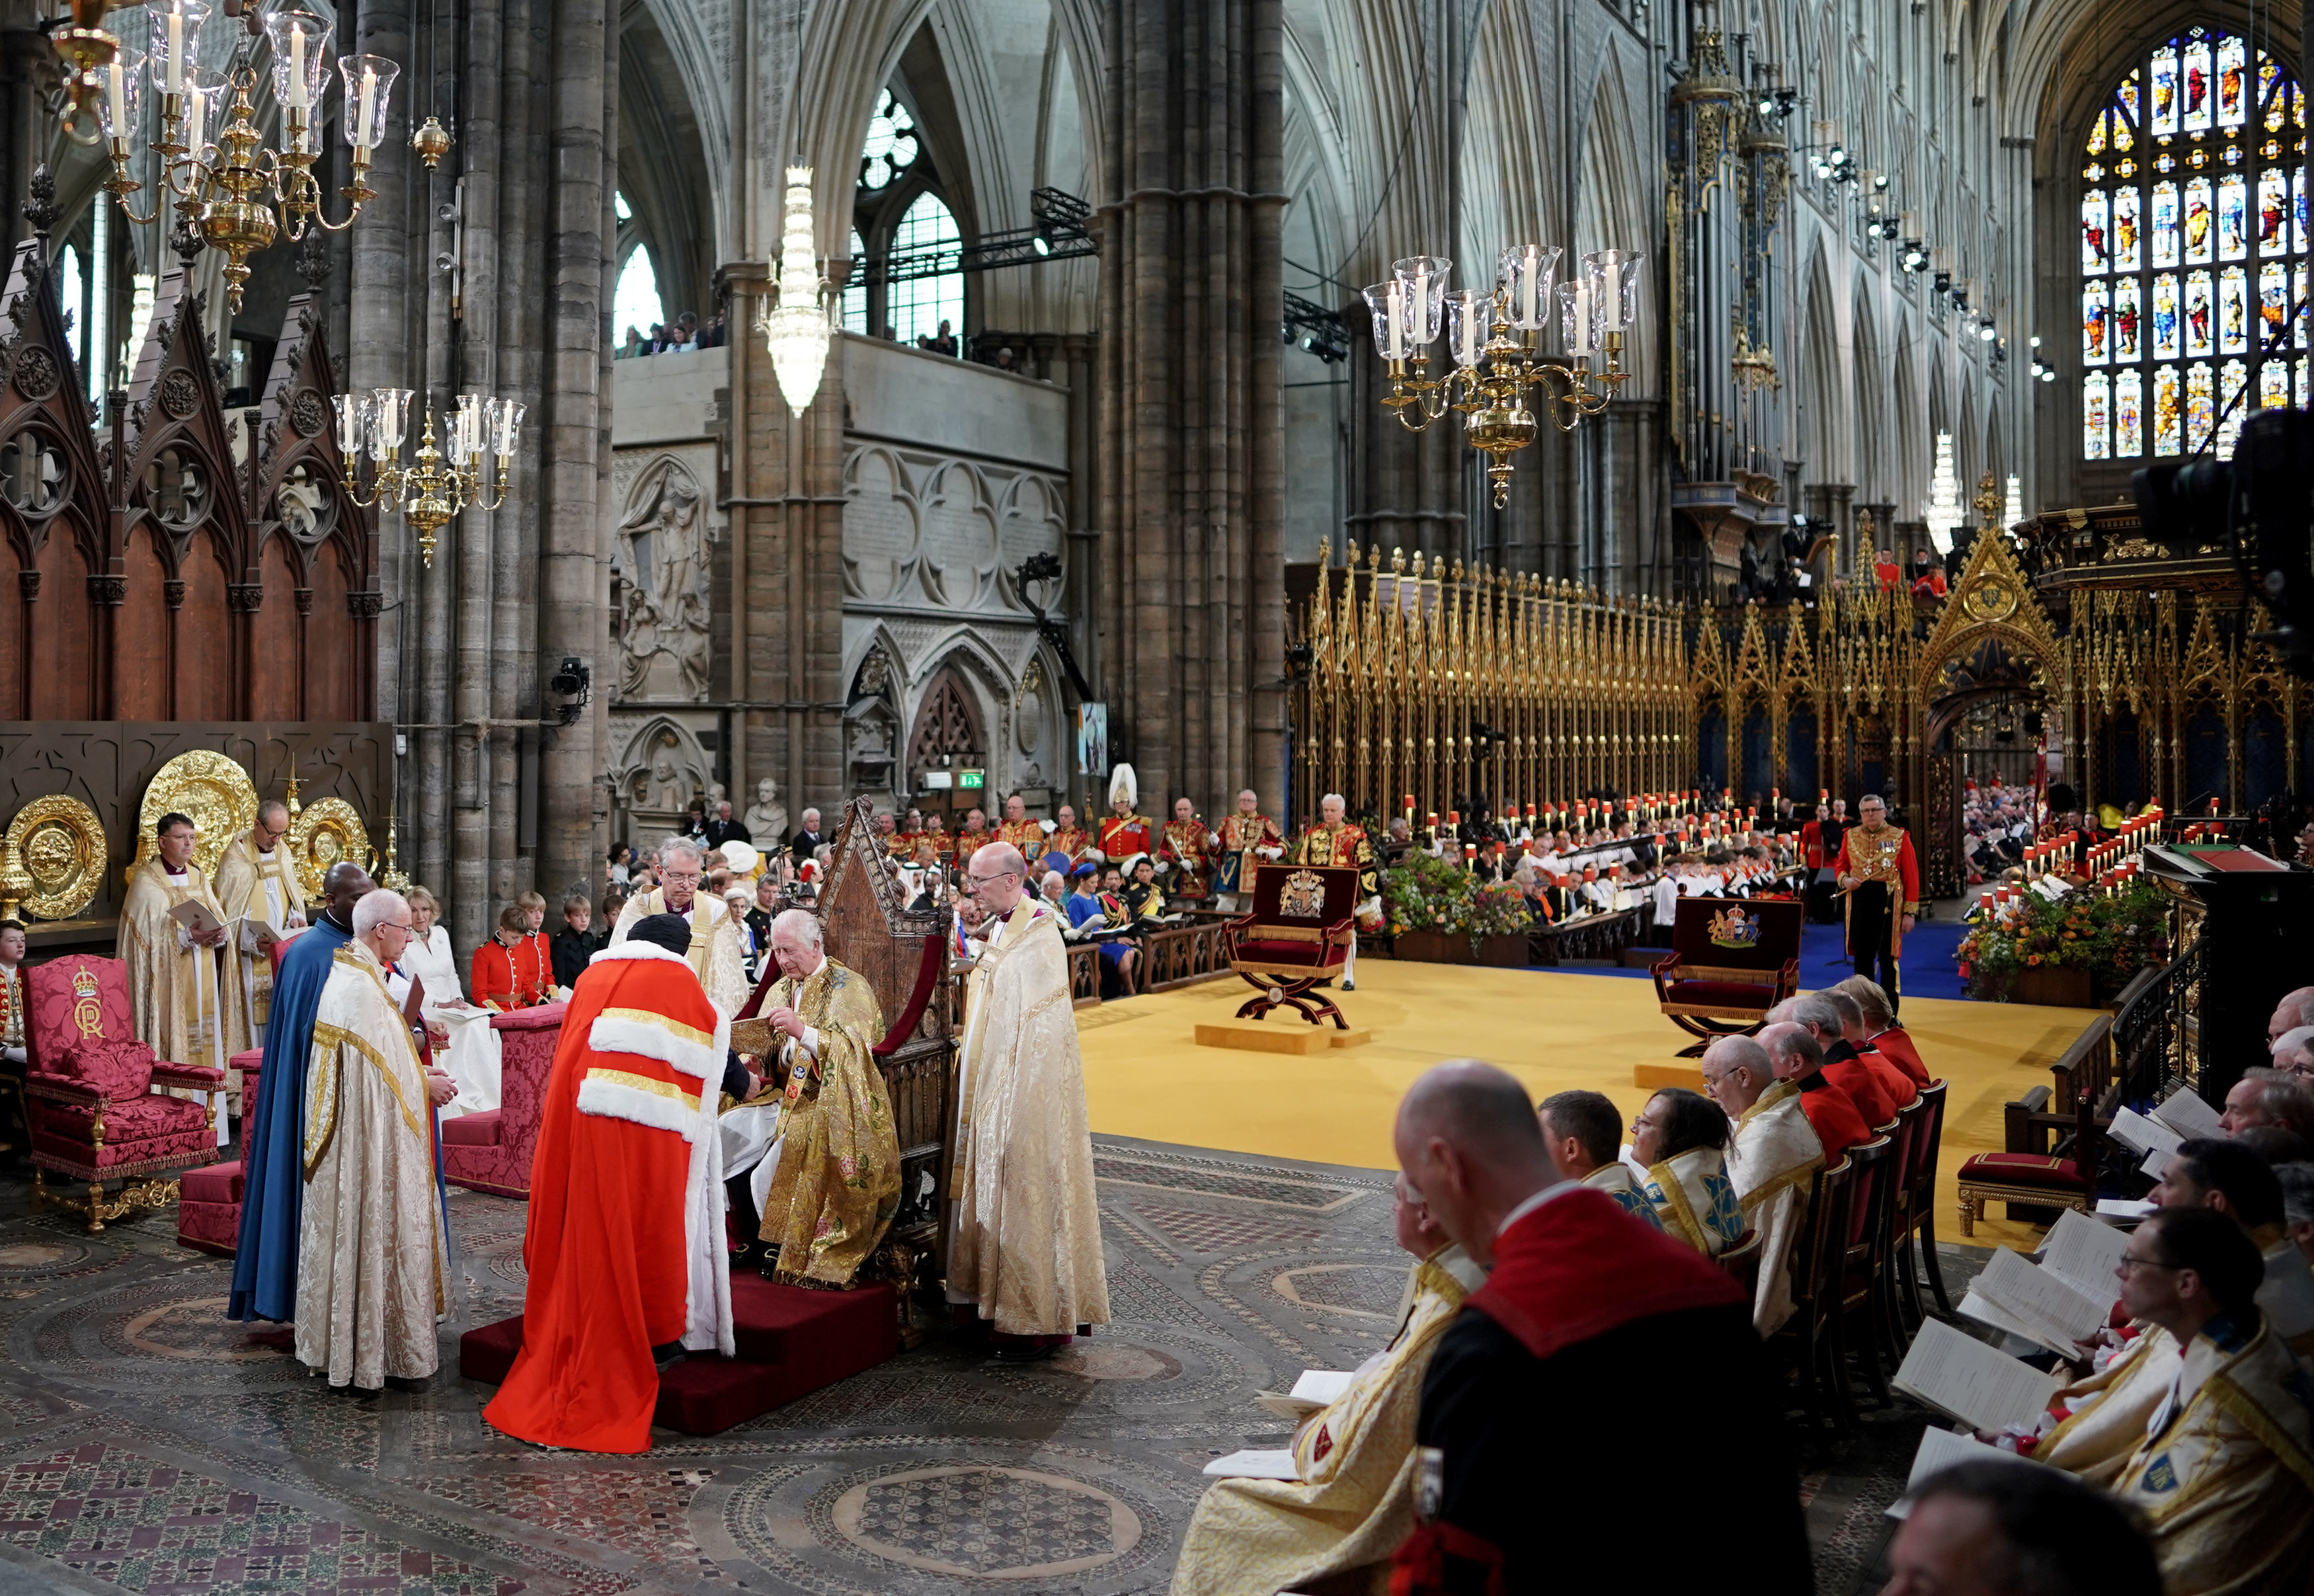 Shot inside Westminster abbey of the Coronation Ceremony of King Charles III